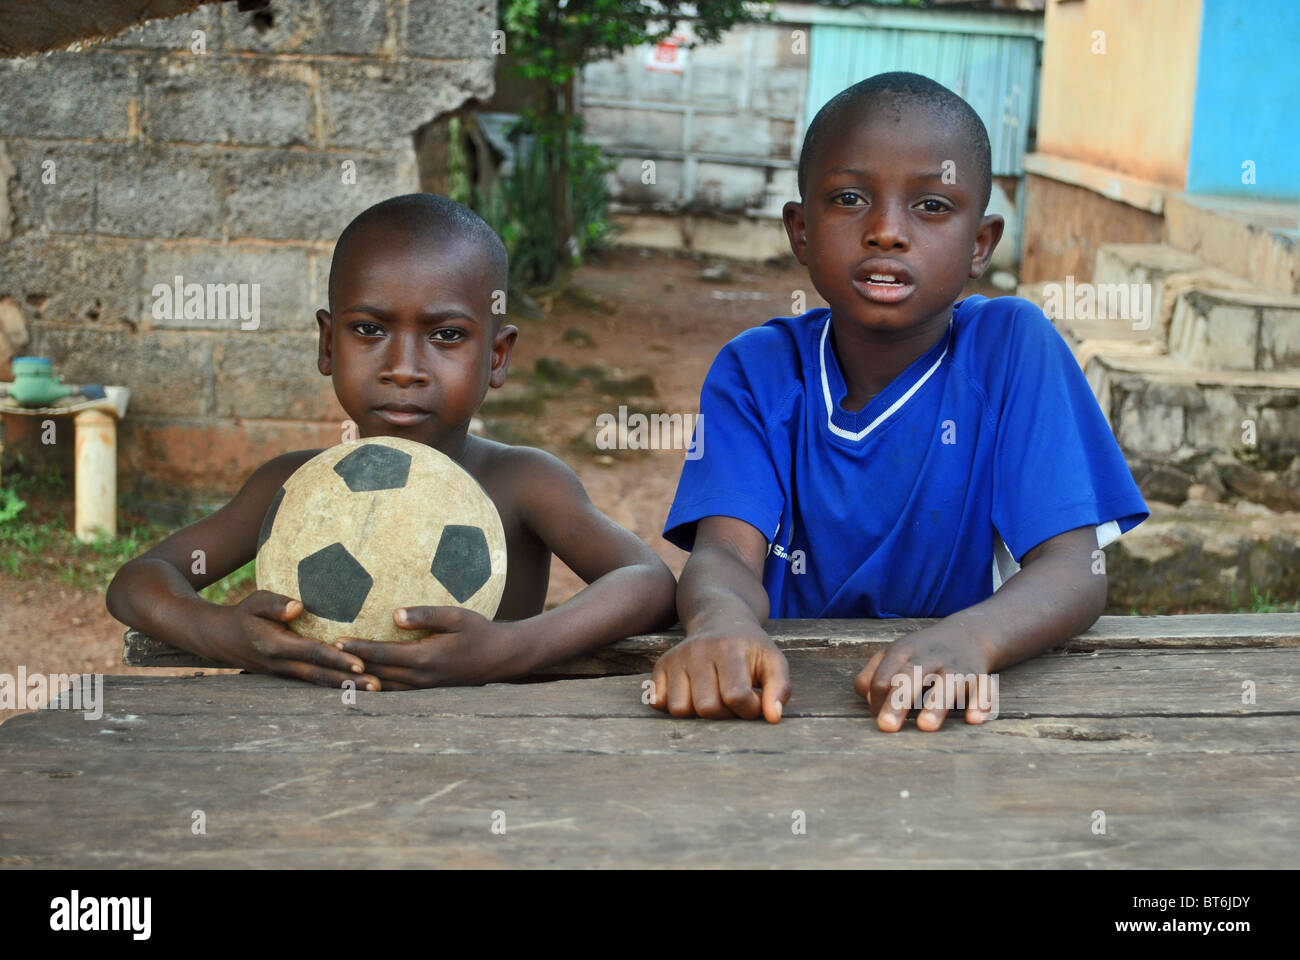 Children with football in Man, Ivory Coast, West Africa Stock Photo